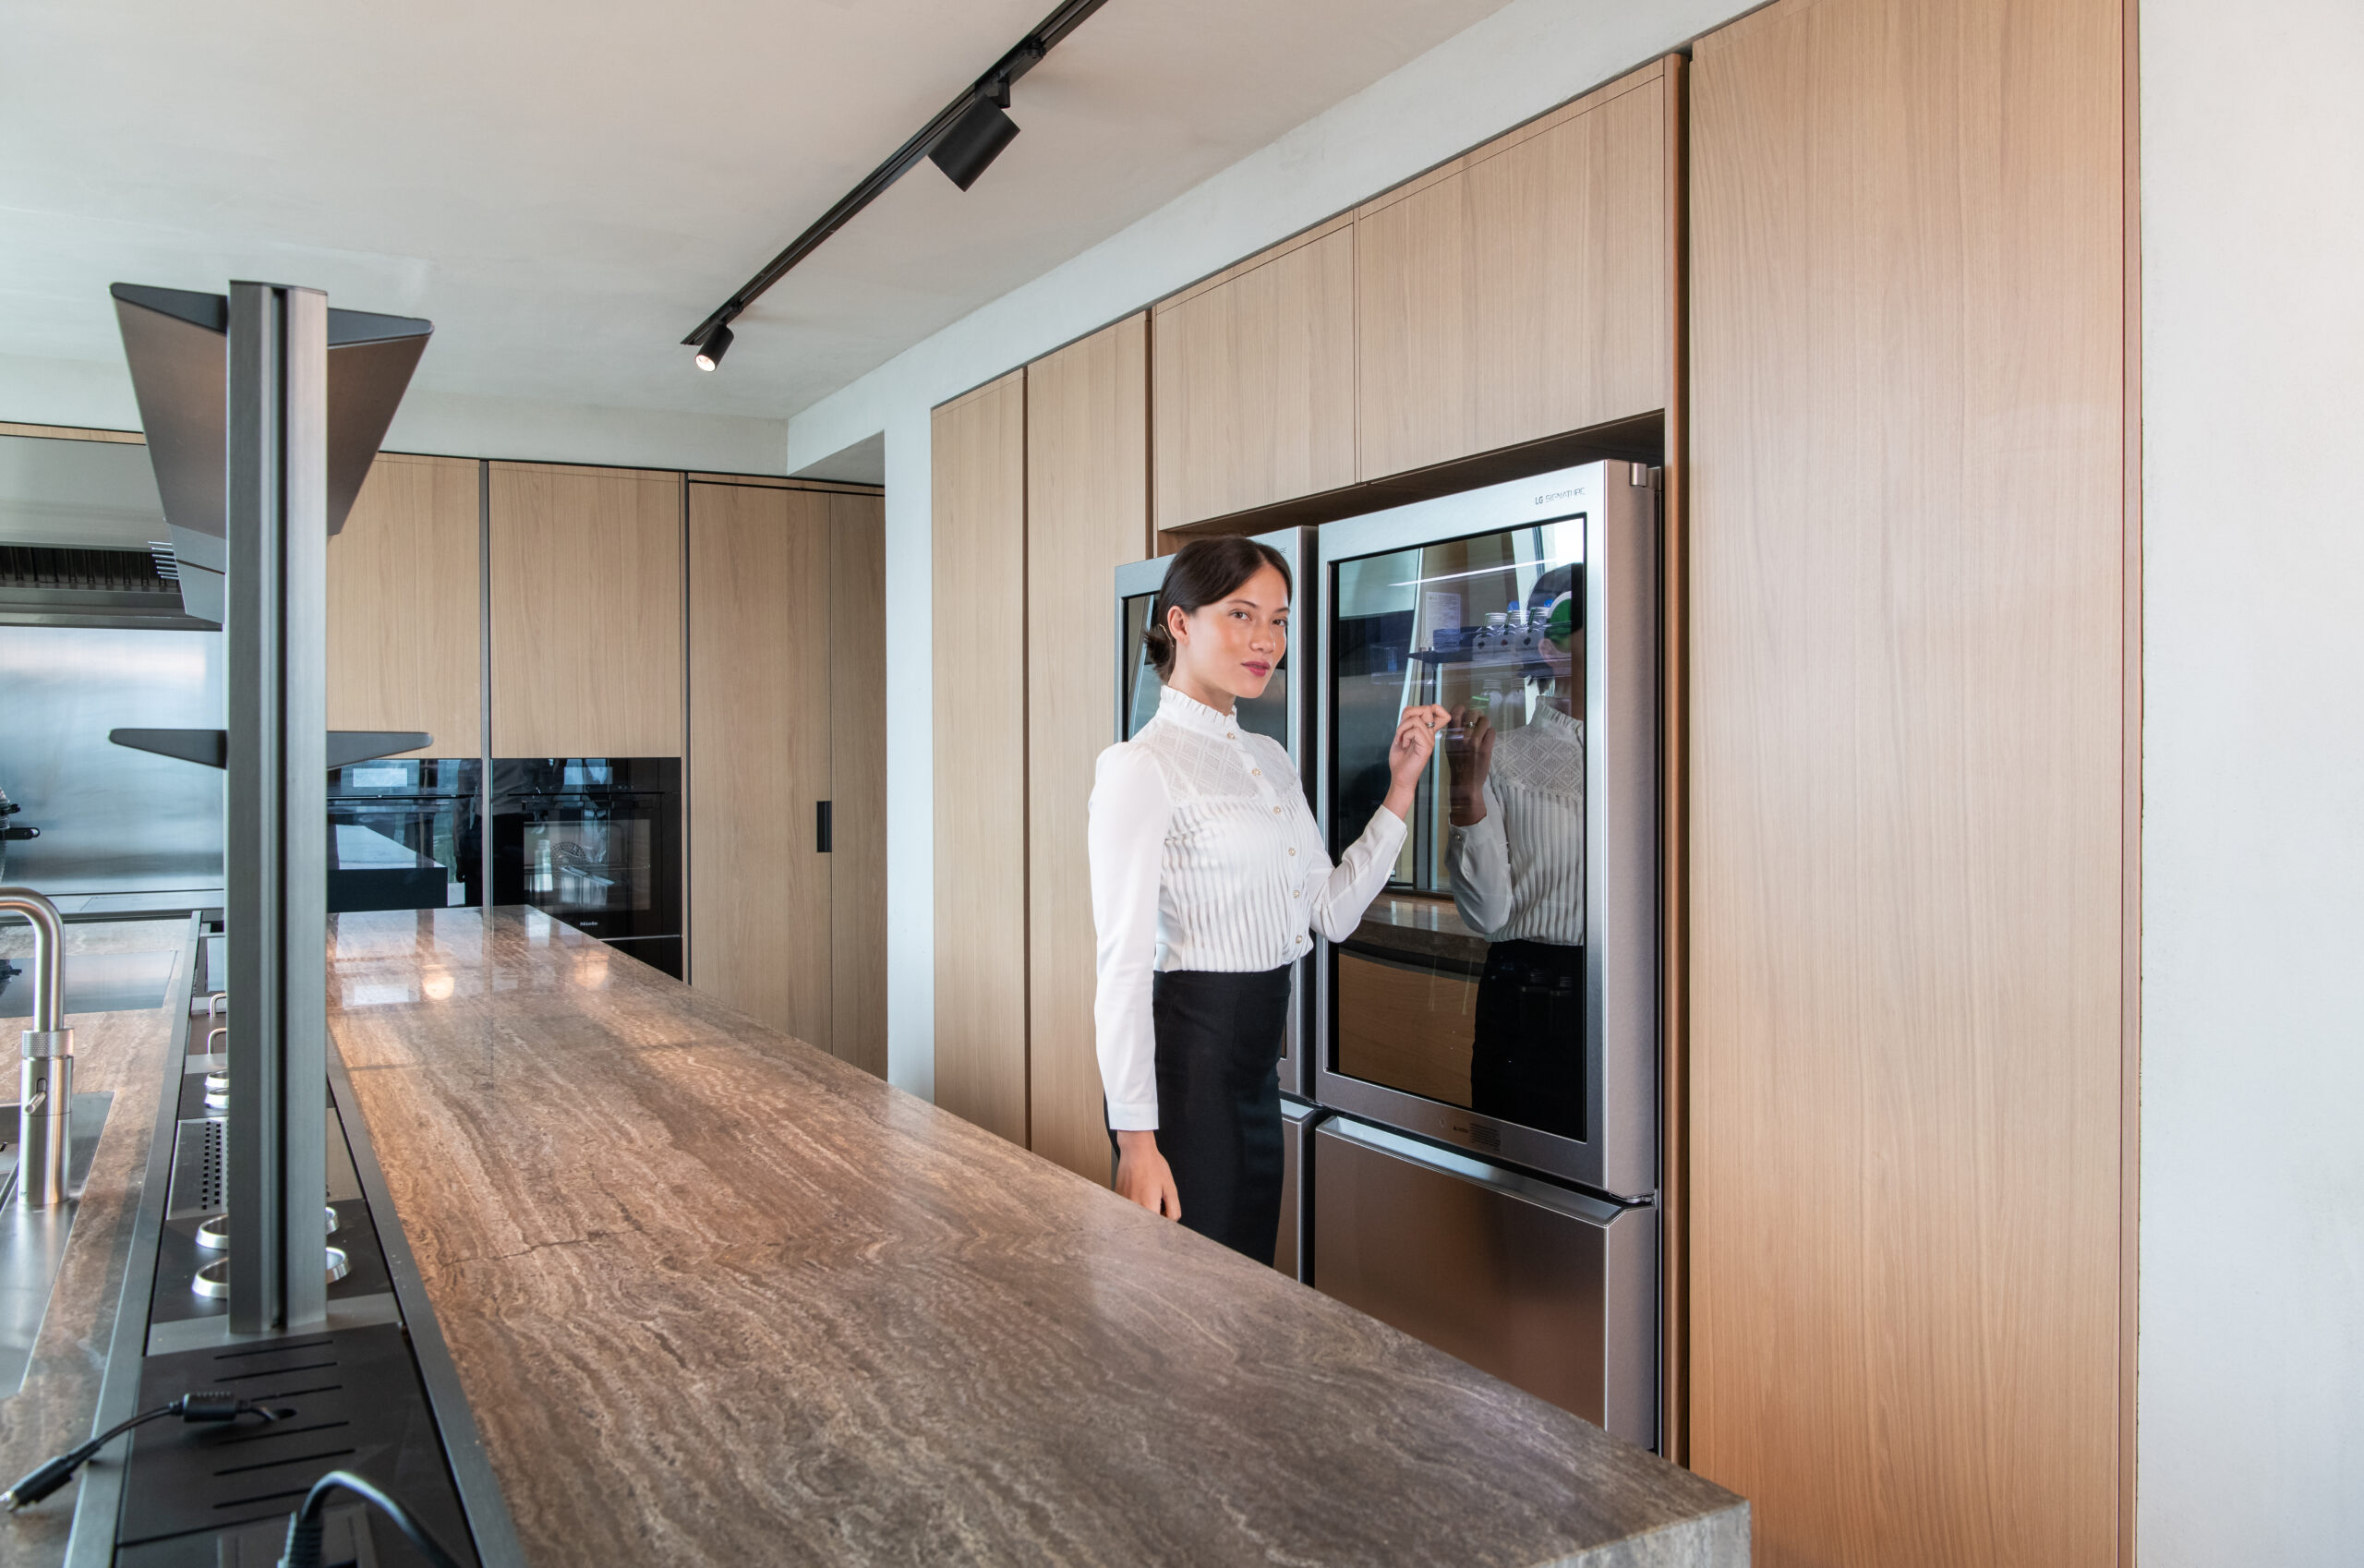 A female knocking on the door of LG SIGNATURE refrigerator to show its special feature at Molteni&C flagship store in Amsterdam.